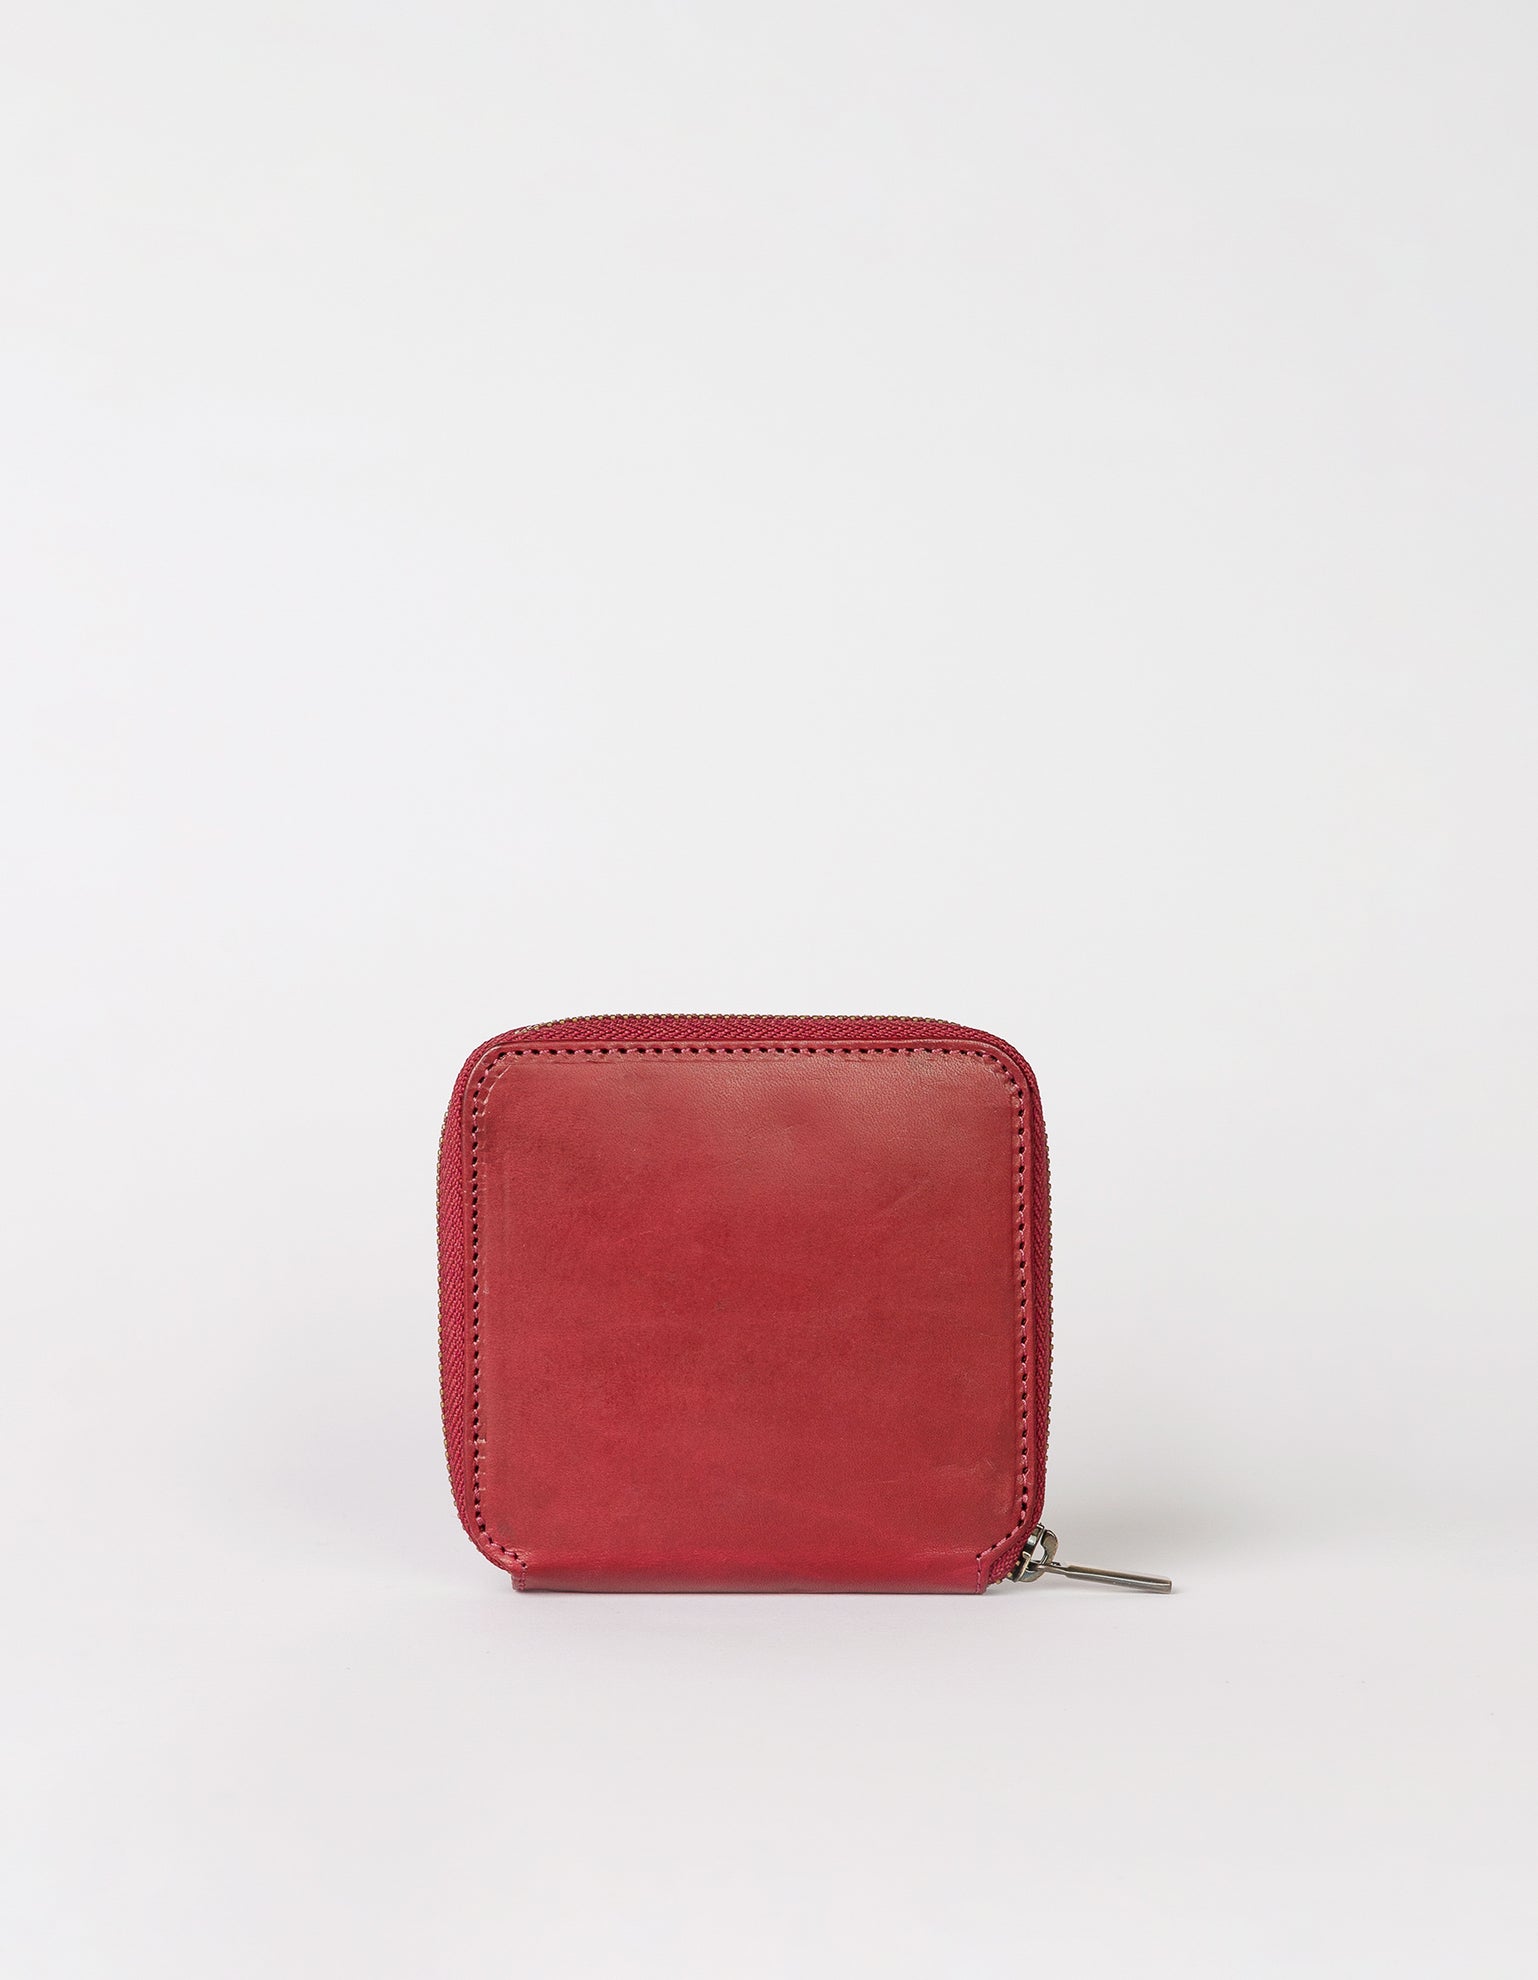 Sonny Square Wallet Ruby Classic Leather - back product image